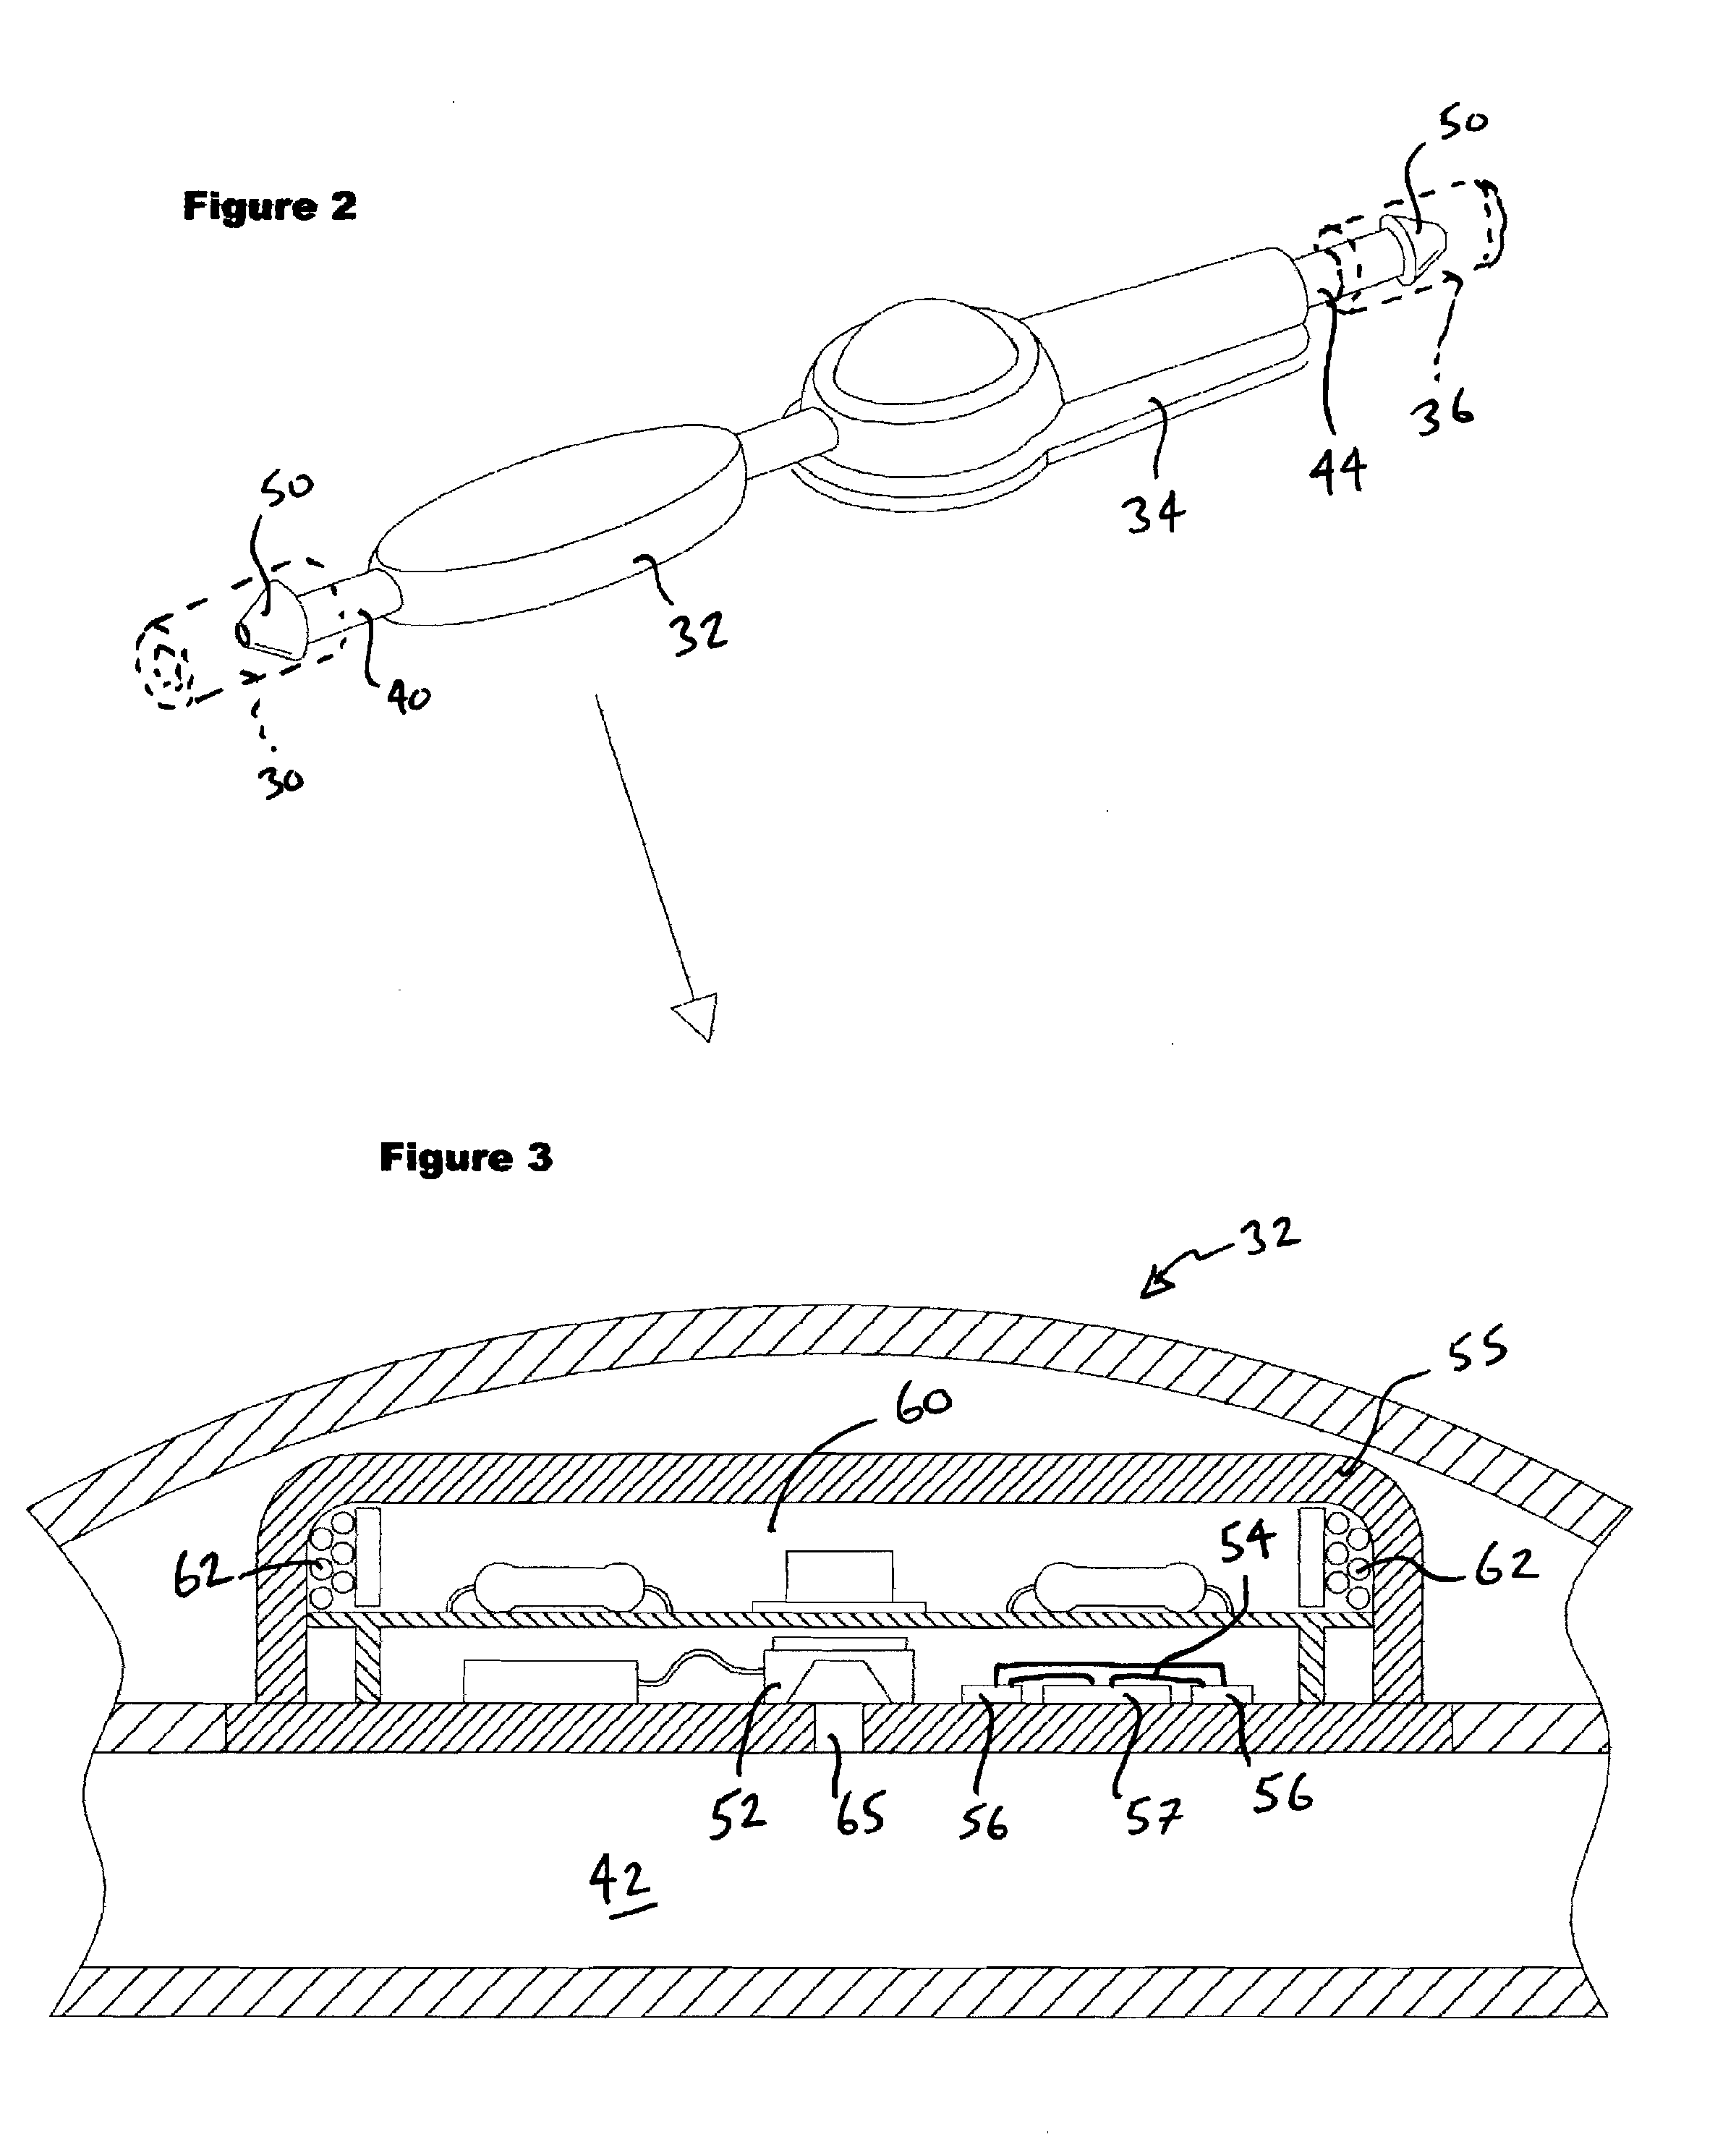 Combined Pressure and Flow Sensor Integrated in a Shunt System